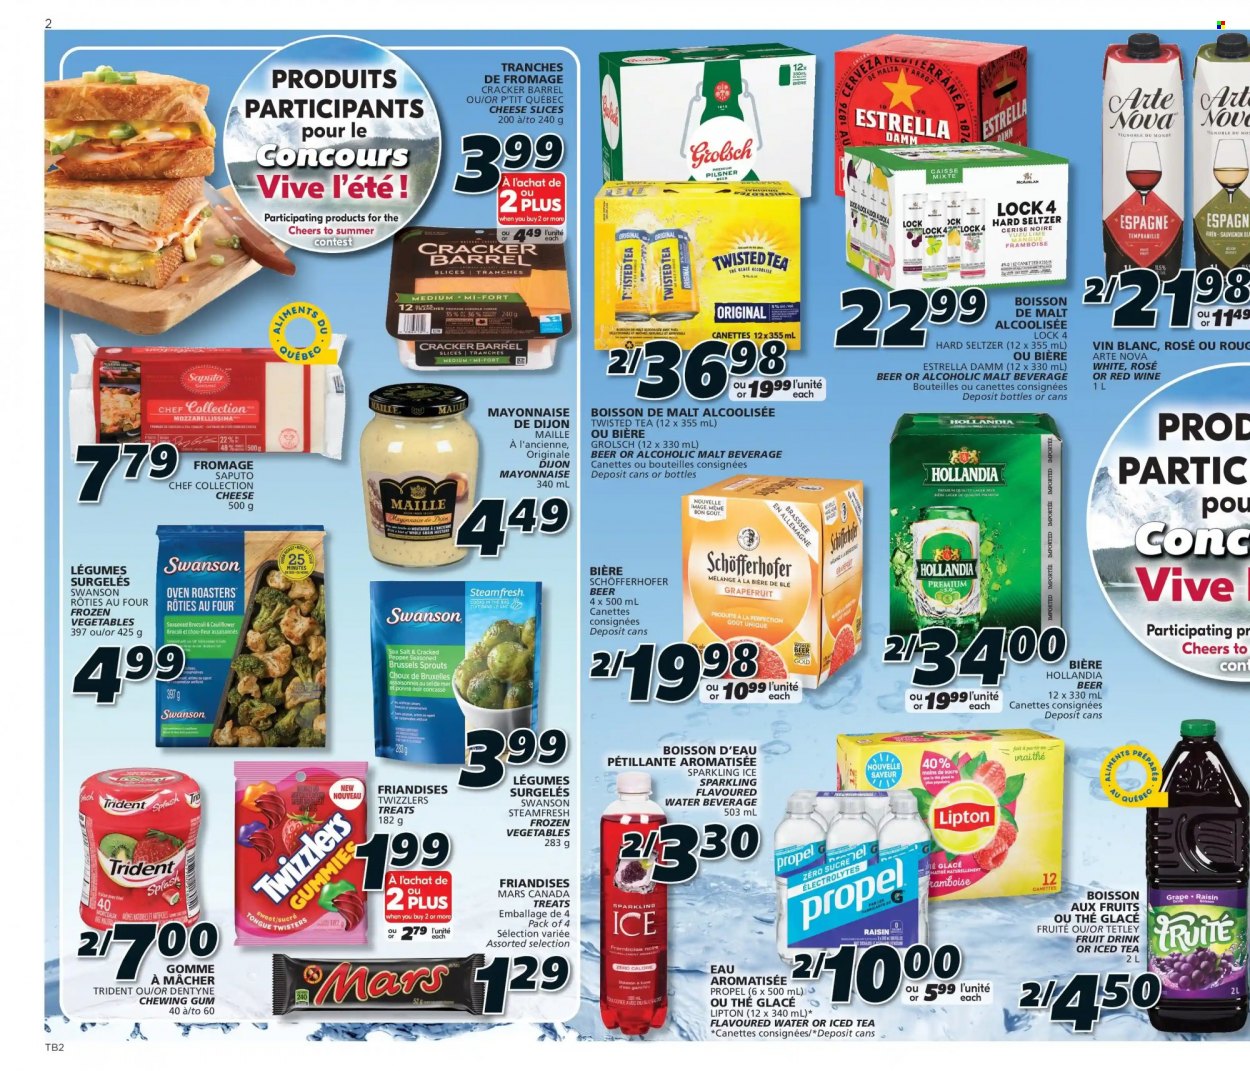 thumbnail - IGA Flyer - May 19, 2022 - May 25, 2022 - Sales products - broccoli, cauliflower, brussel sprouts, grapefruits, sliced cheese, cheese, mayonnaise, frozen vegetables, Mars, crackers, chewing gum, Trident, malt, pepper, fruit drink, ice tea, red wine, wine, Tempranillo, rosé wine, Hard Seltzer, beer, Grolsch, Lager, Lipton, Twisted Tea. Page 2.